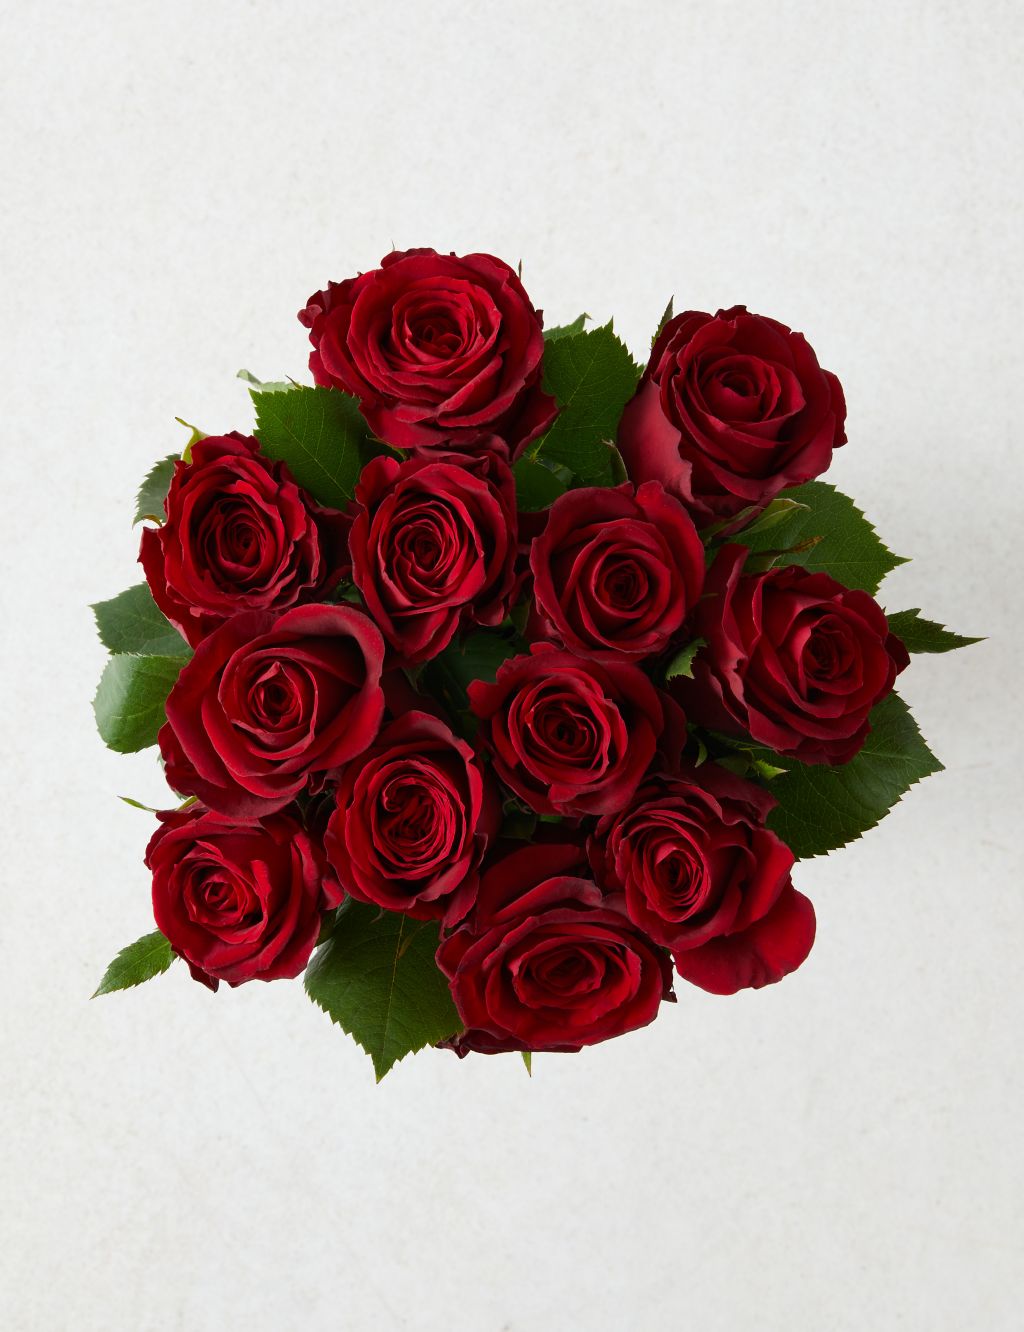 Dozen Red Rose Bouquet & Prosecco (Delivery from 09/02/24)